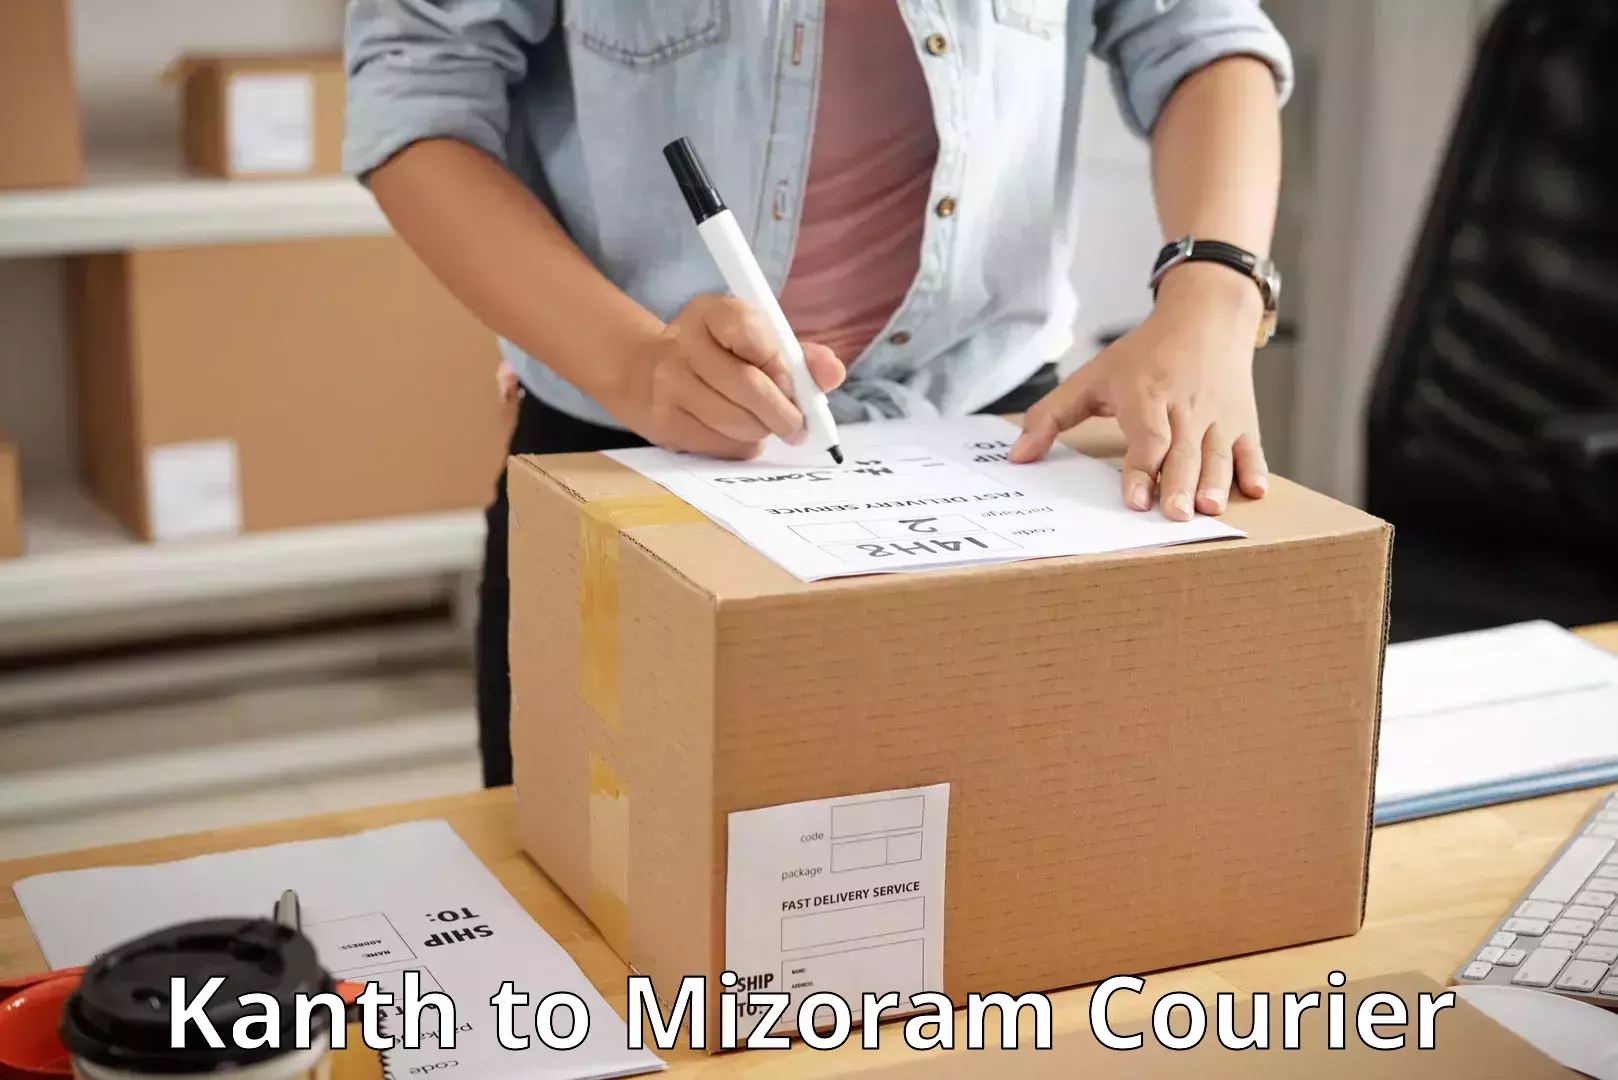 Cost-effective courier options Kanth to Mizoram